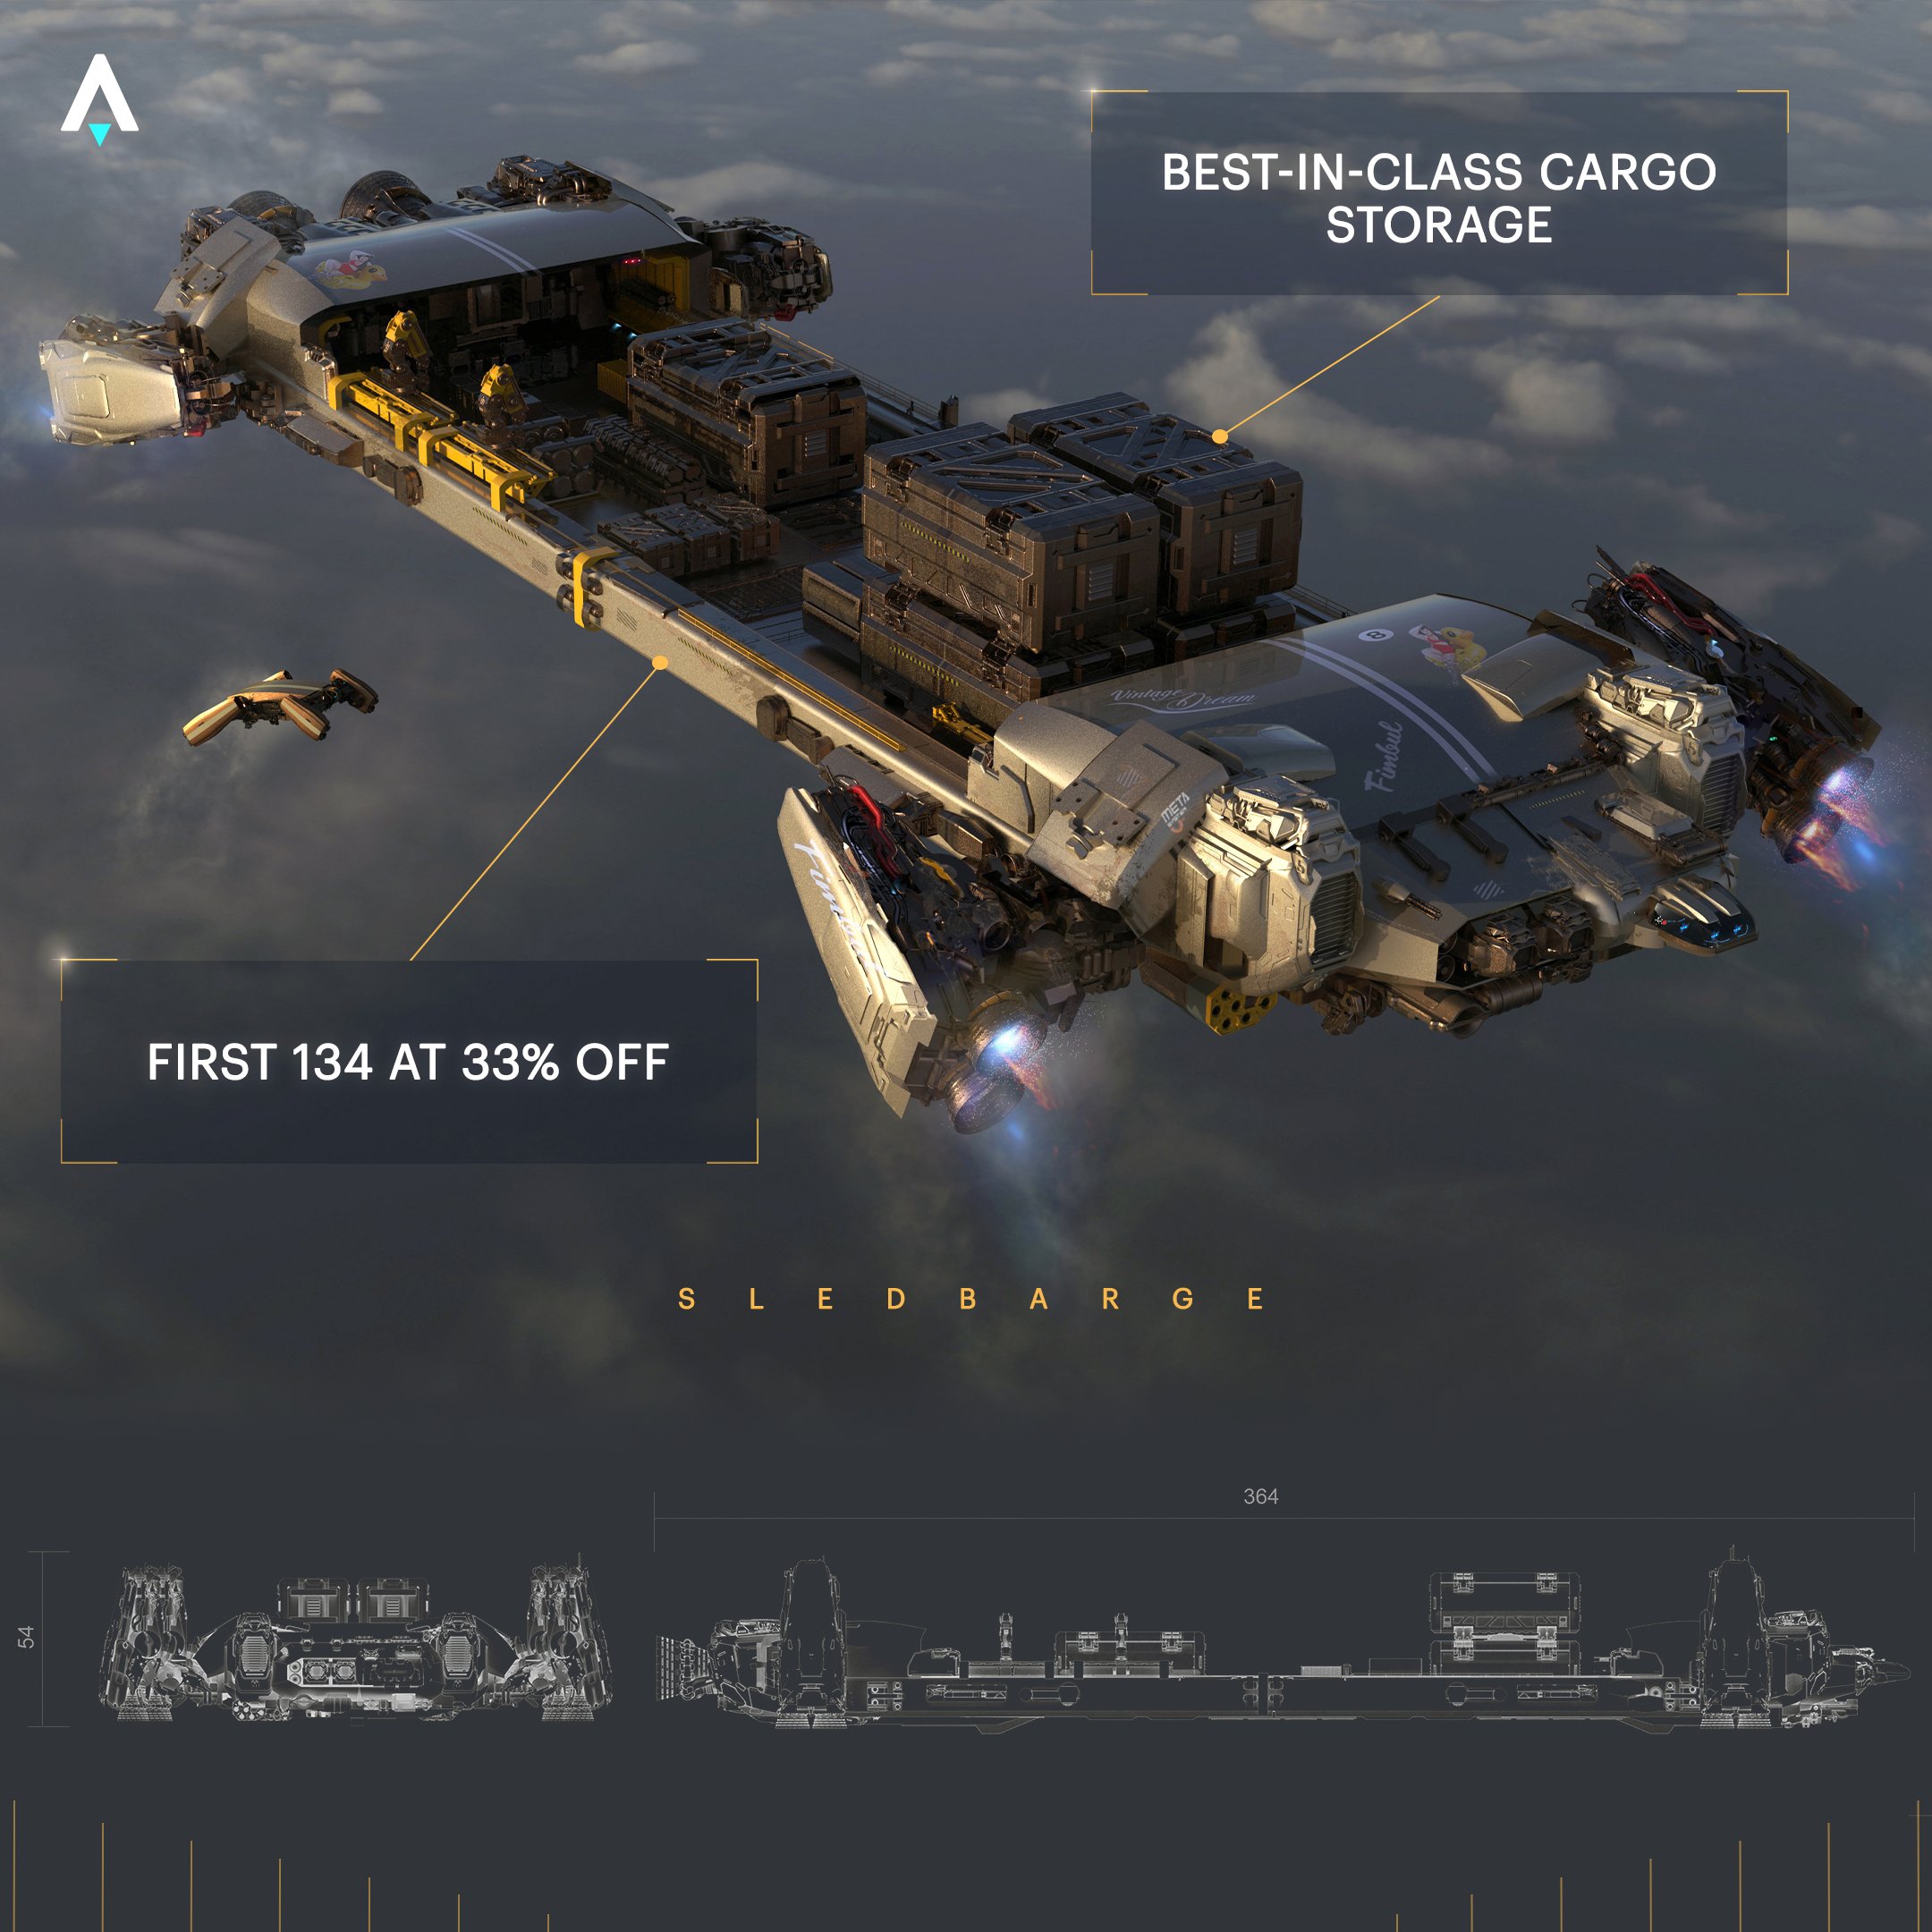 Star Atlas on X: The Fimbul Sledbarge is a reminder that we're living in  the Golden Era of space exploration. Get the first Capital Freighter now  and equip yourself with best-in-class cargo